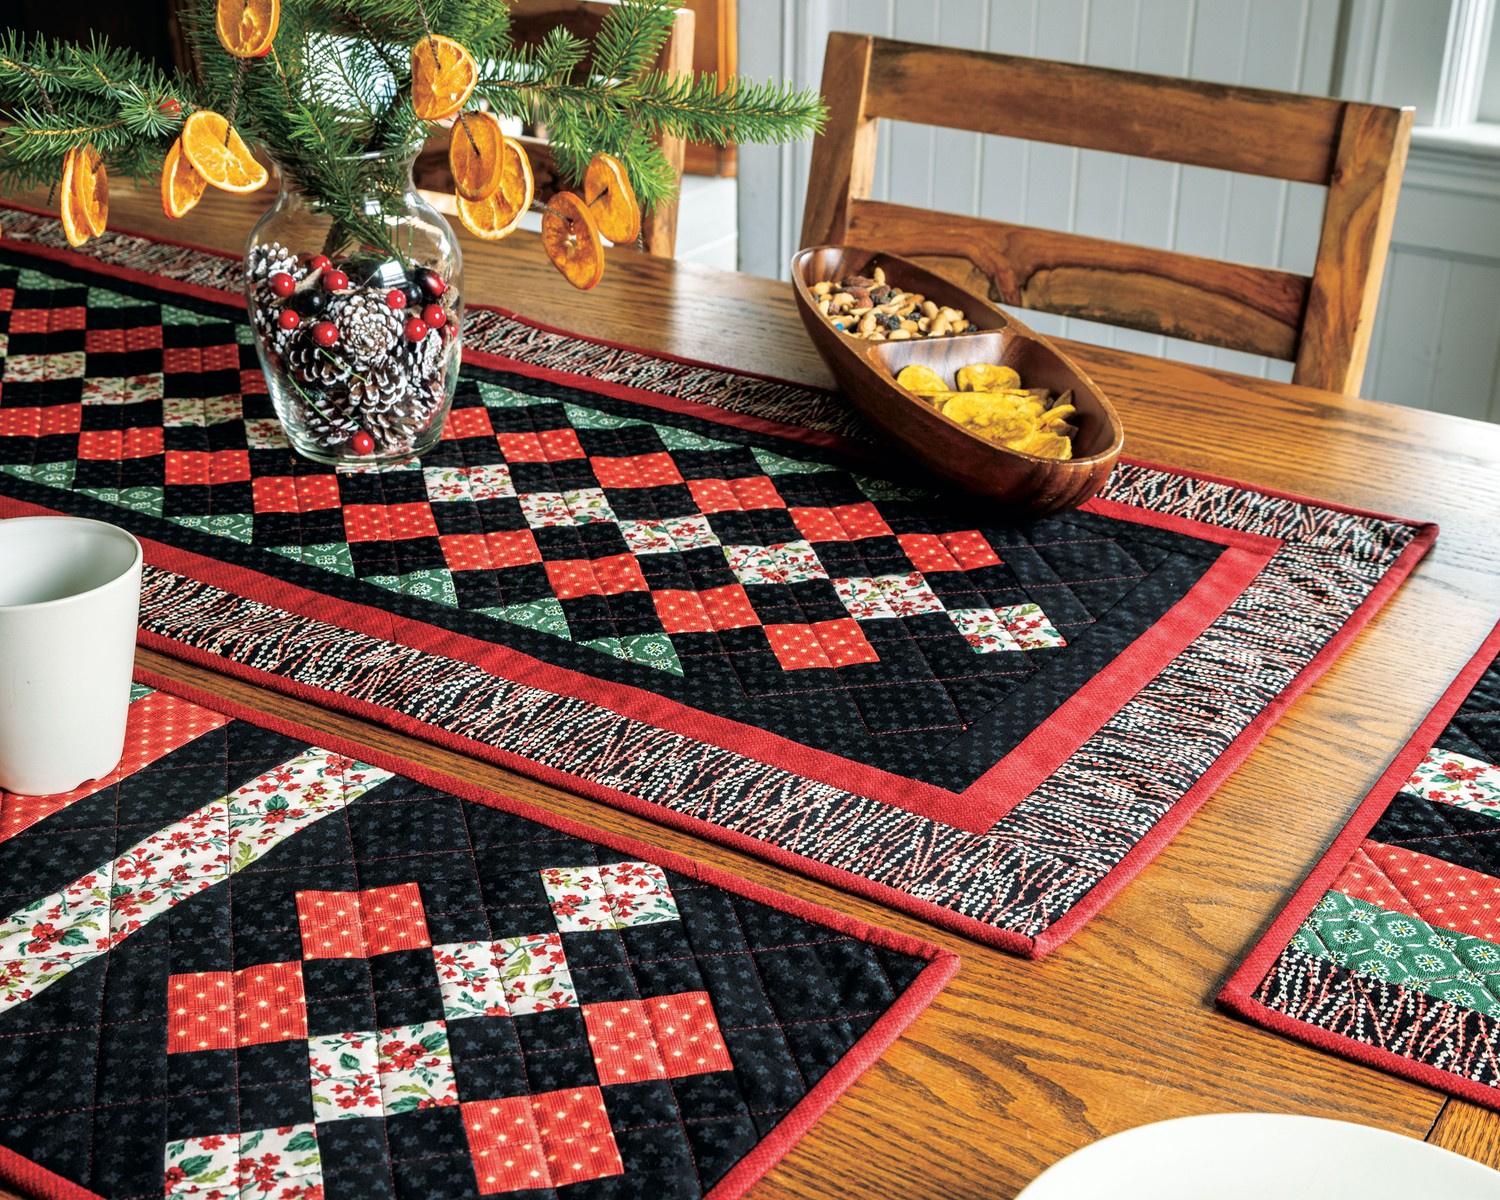 Black Pearl Table Runner and Placemat Kit by Phoebe Moon Designs